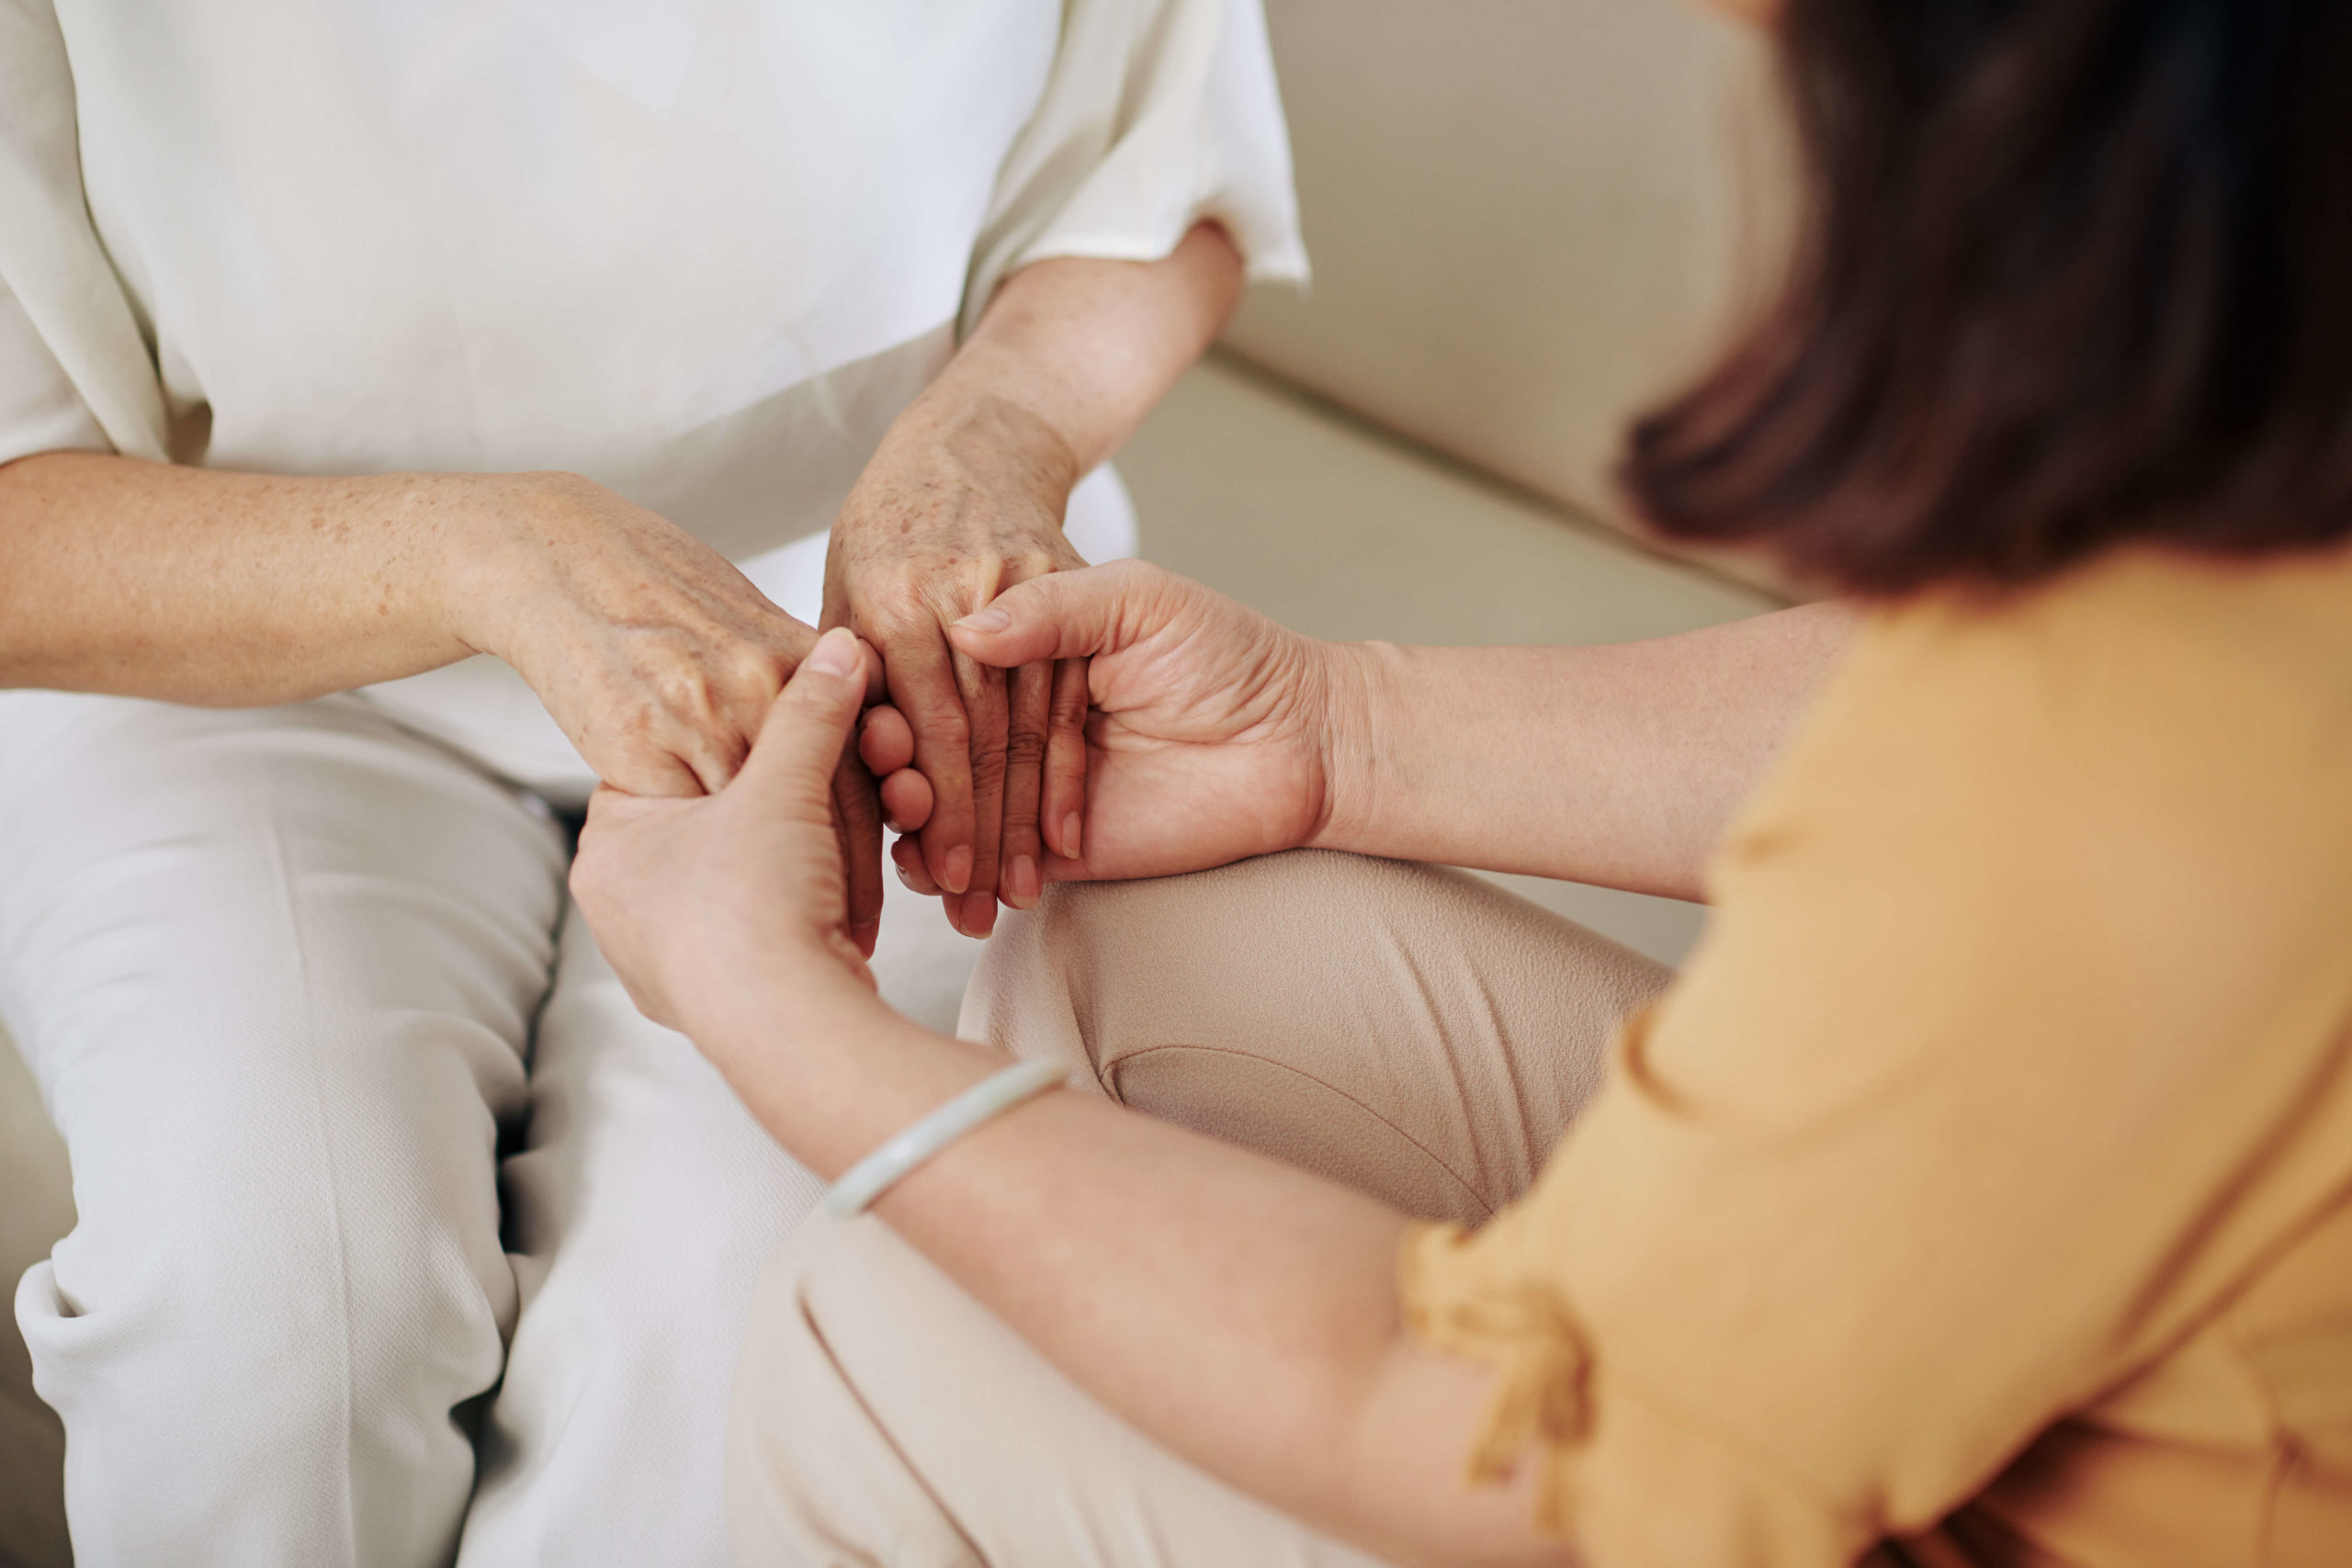 Tips for Family Caregiver Looking After Dementia Patients